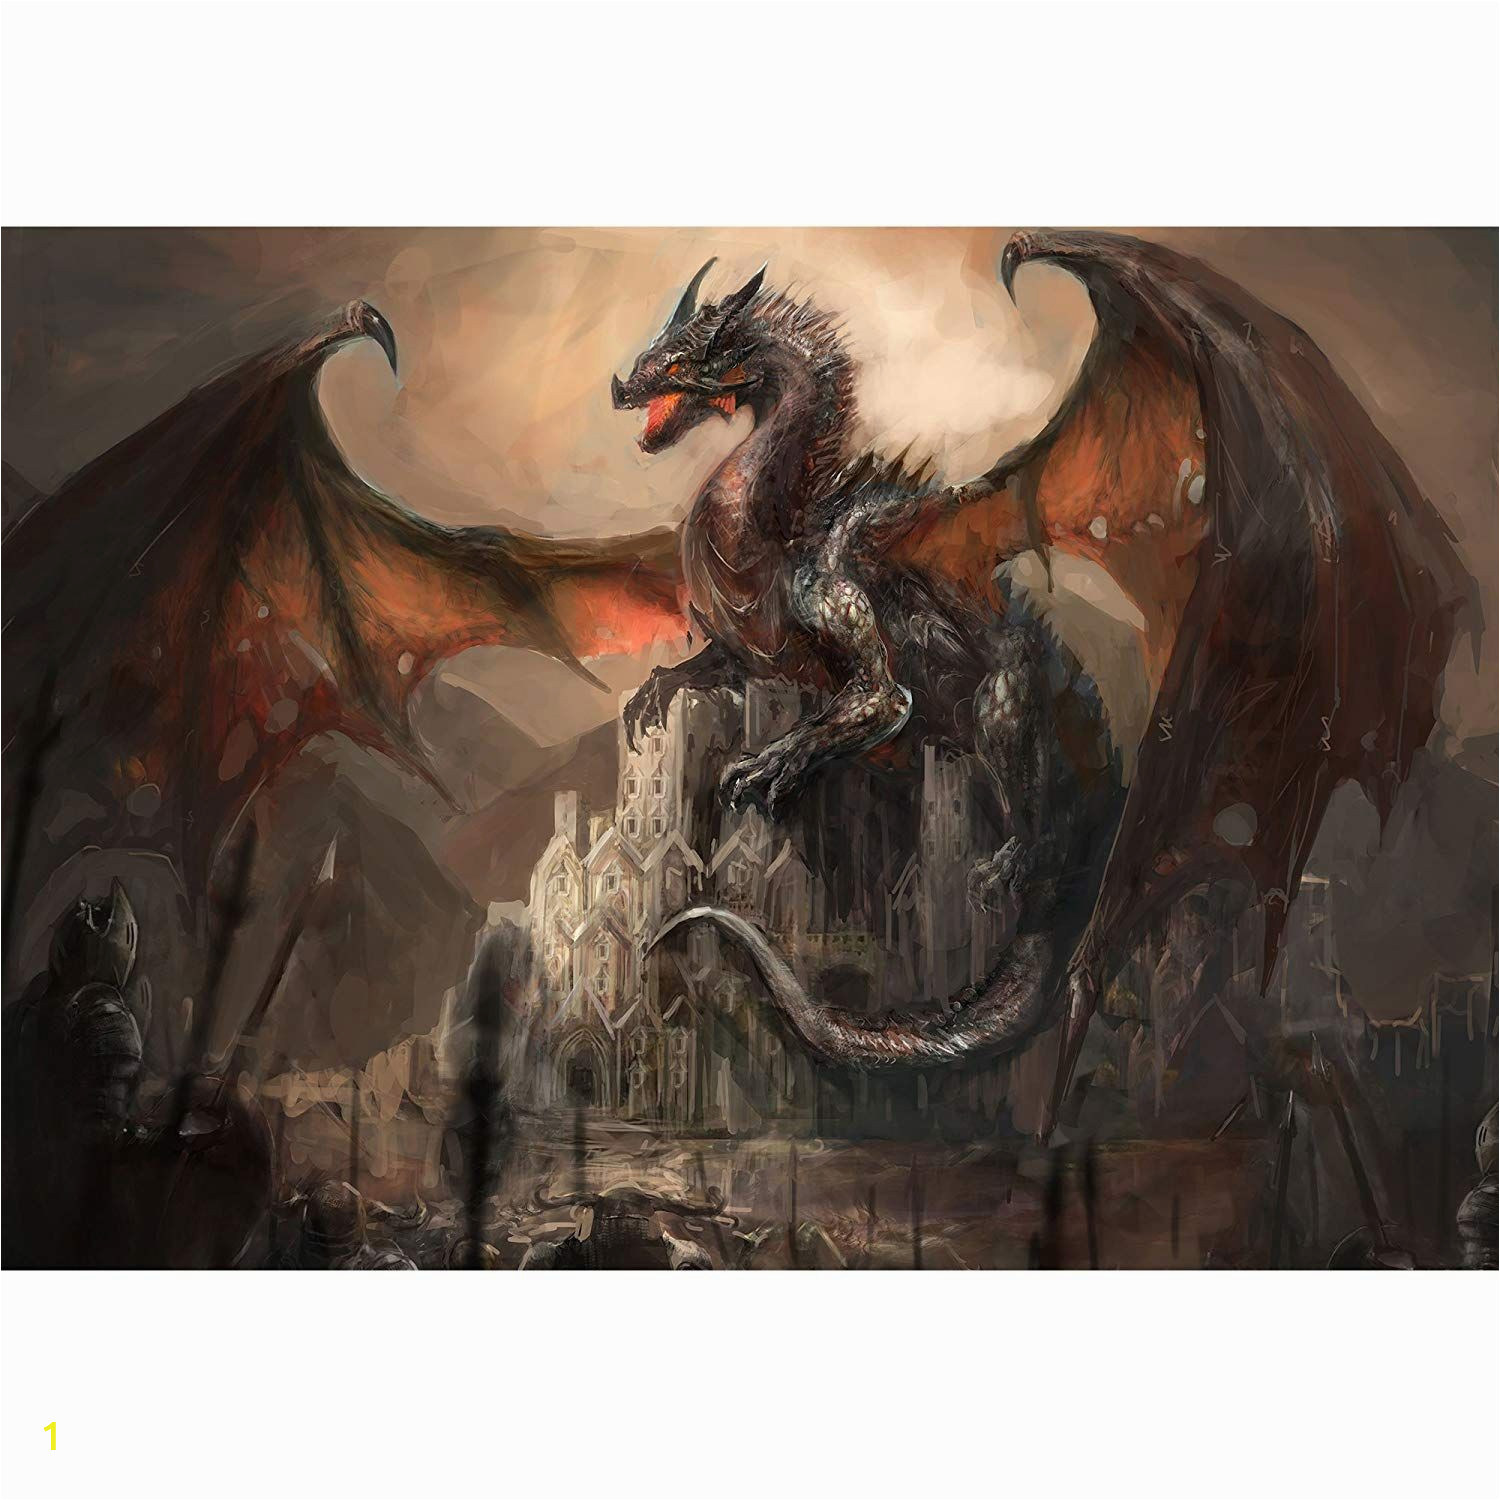 War Of the Wall Mural War with the Dragon On Castle In 2019 Fairytale